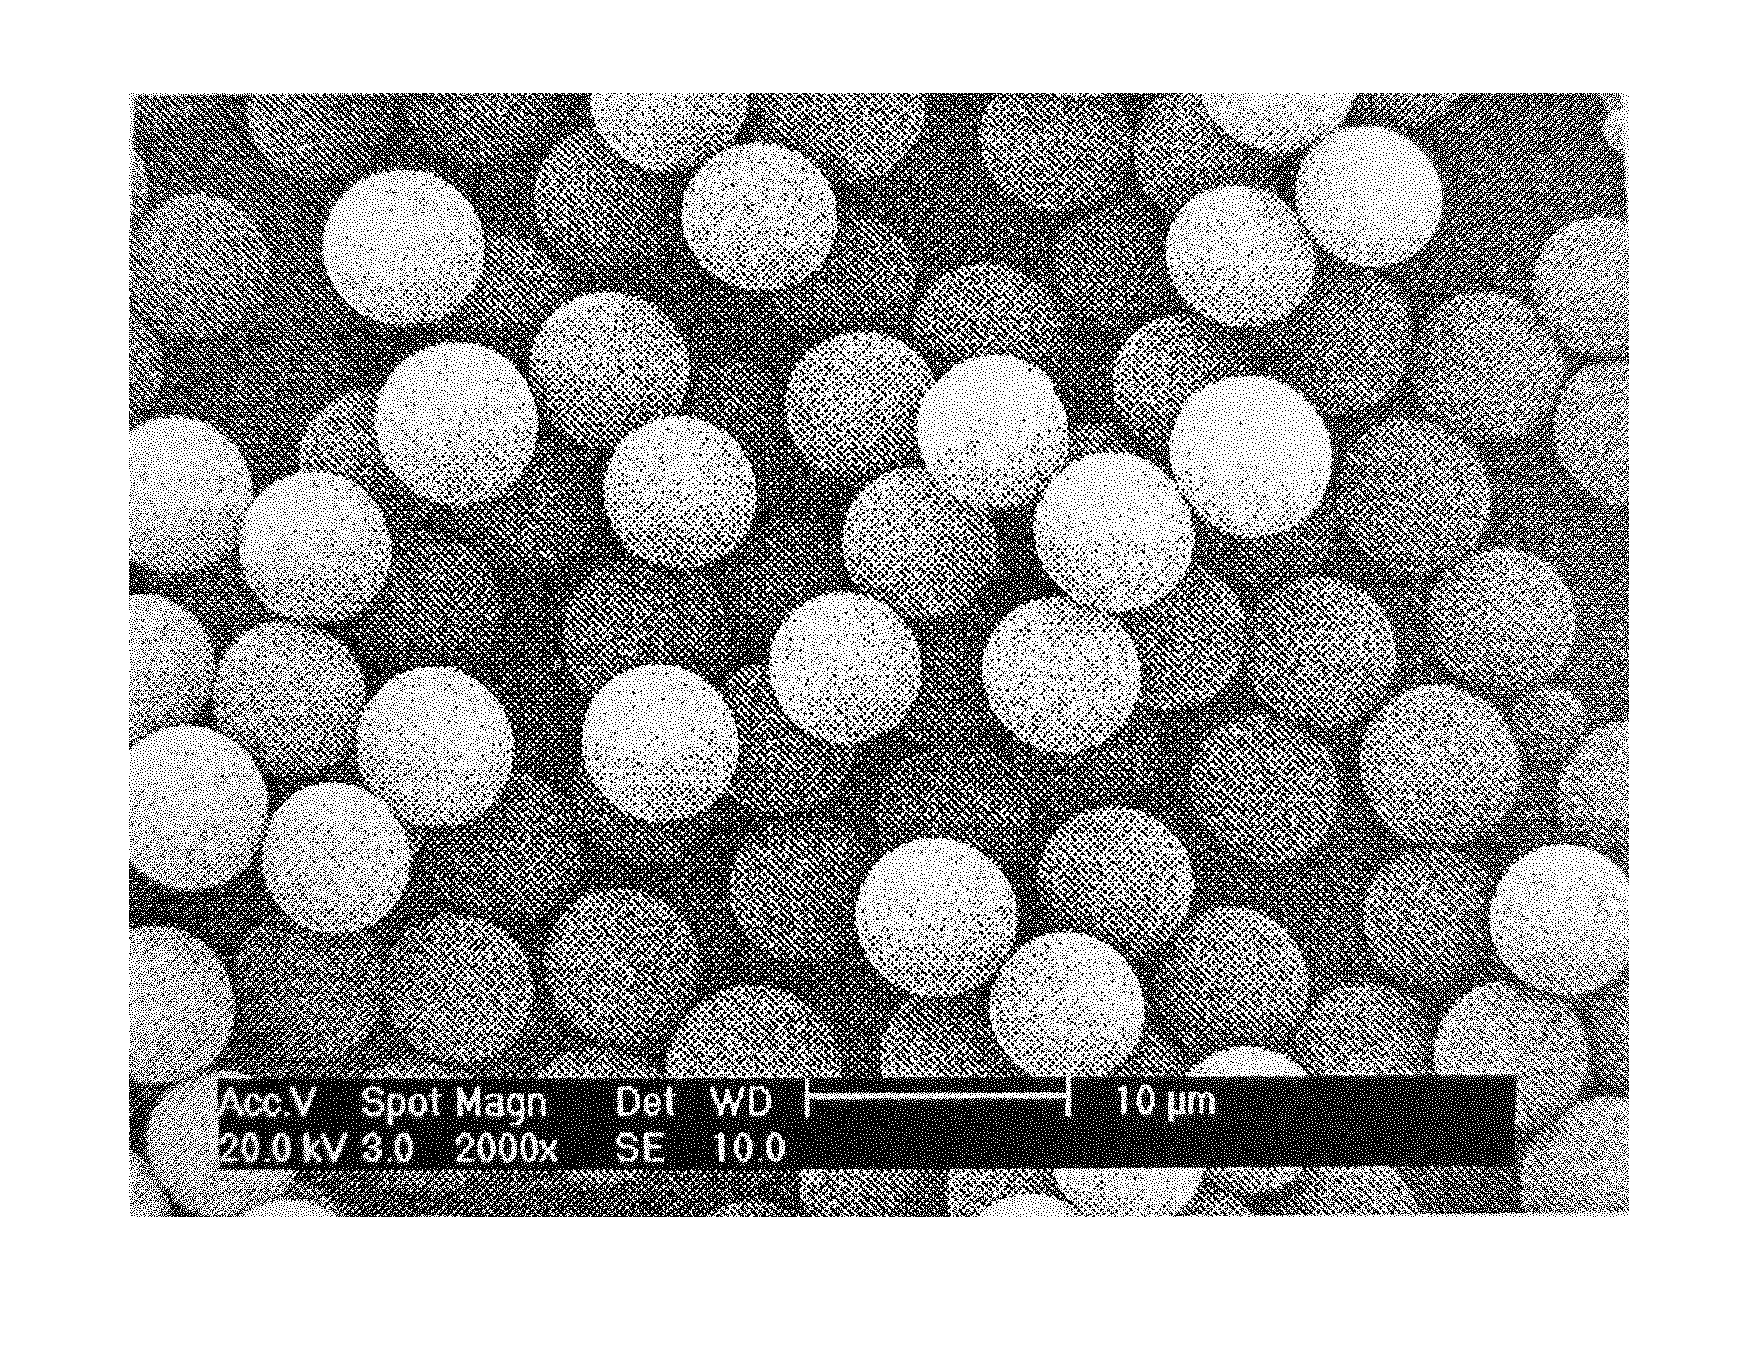 Immunolatex microsphere for detecting CpTI and preparation method thereof